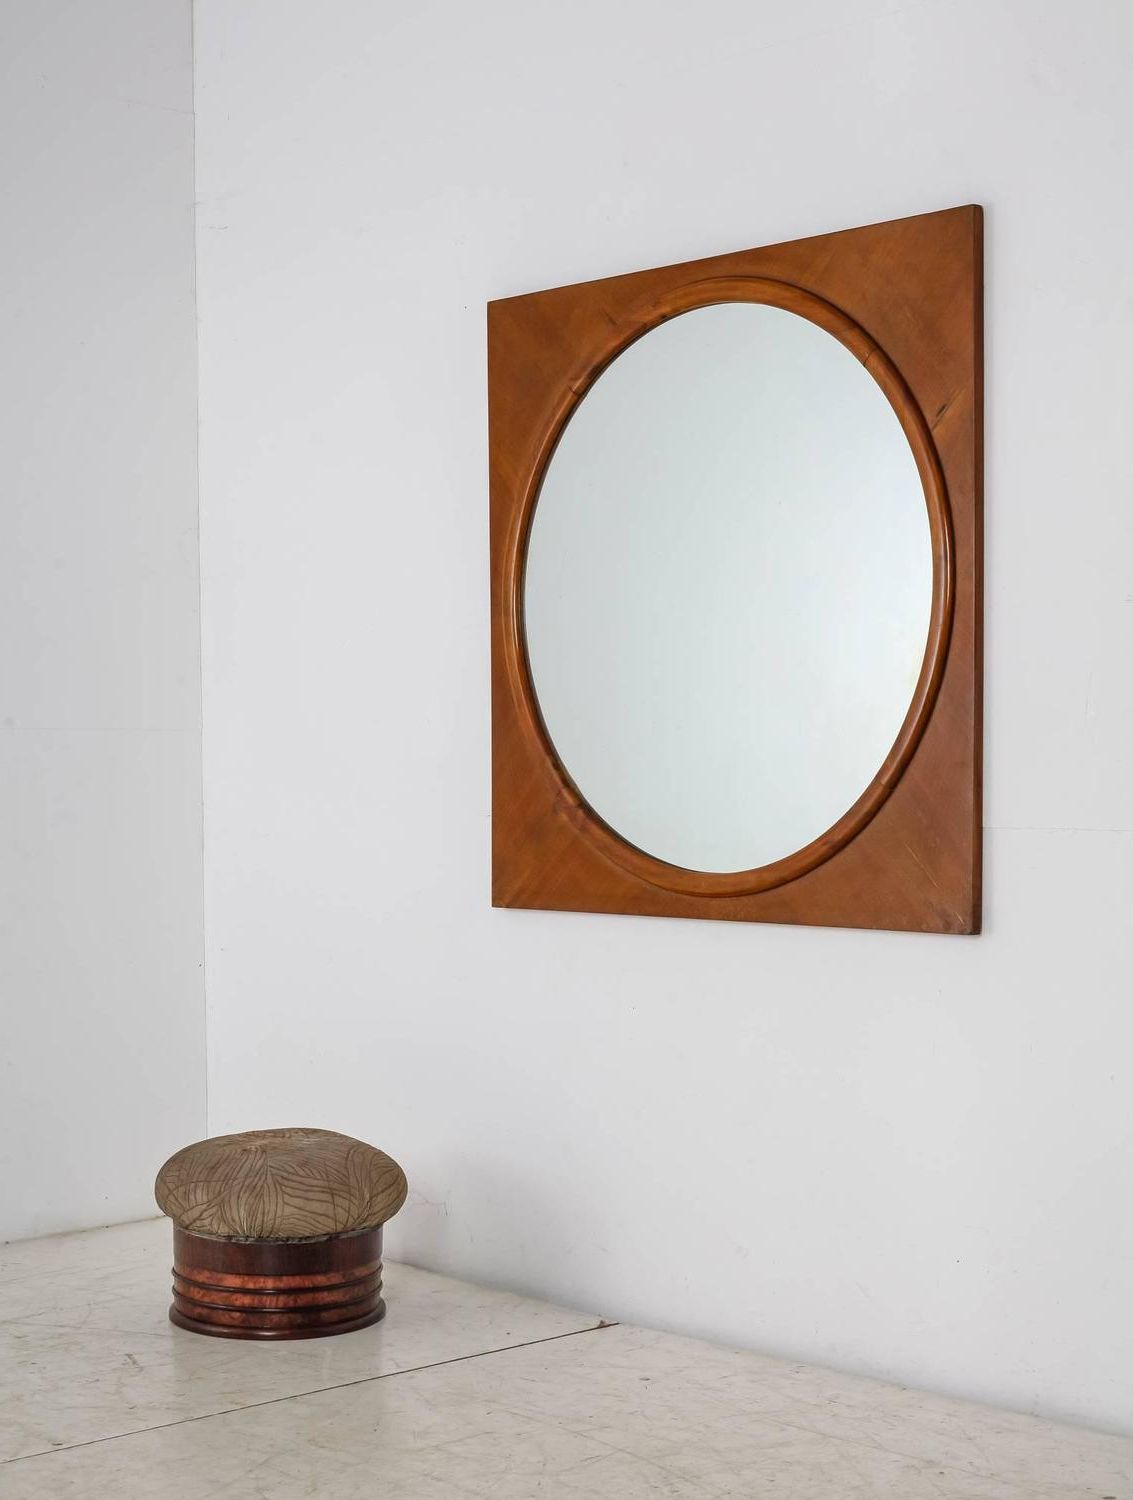 Large Round Wall Mirror In Square Walnut Frame, Italy, 1940s For Sale In Widely Used Square Oversized Wall Mirrors (View 14 of 15)